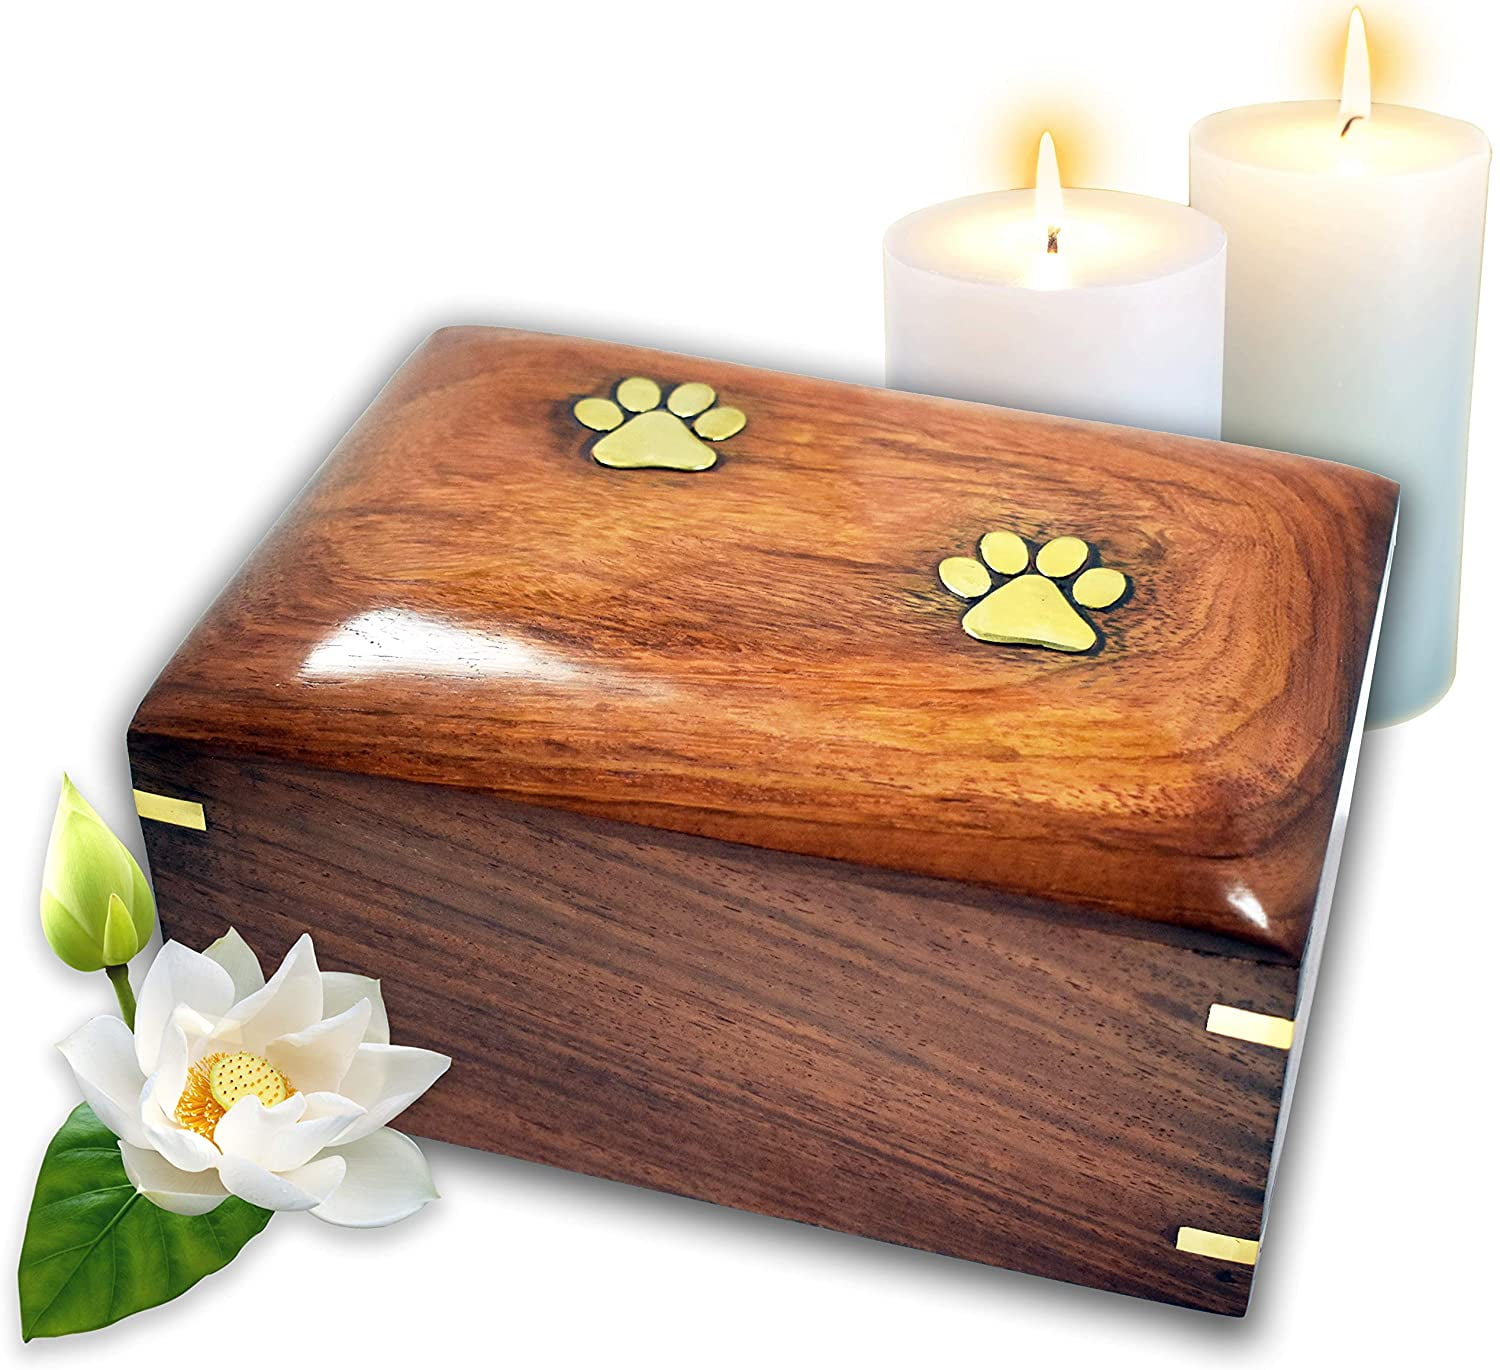 wood memorial urn wooden pet urn stunning tribute to a lost loved one to be treasured and loved. wood pet cremation urn Cremation urn